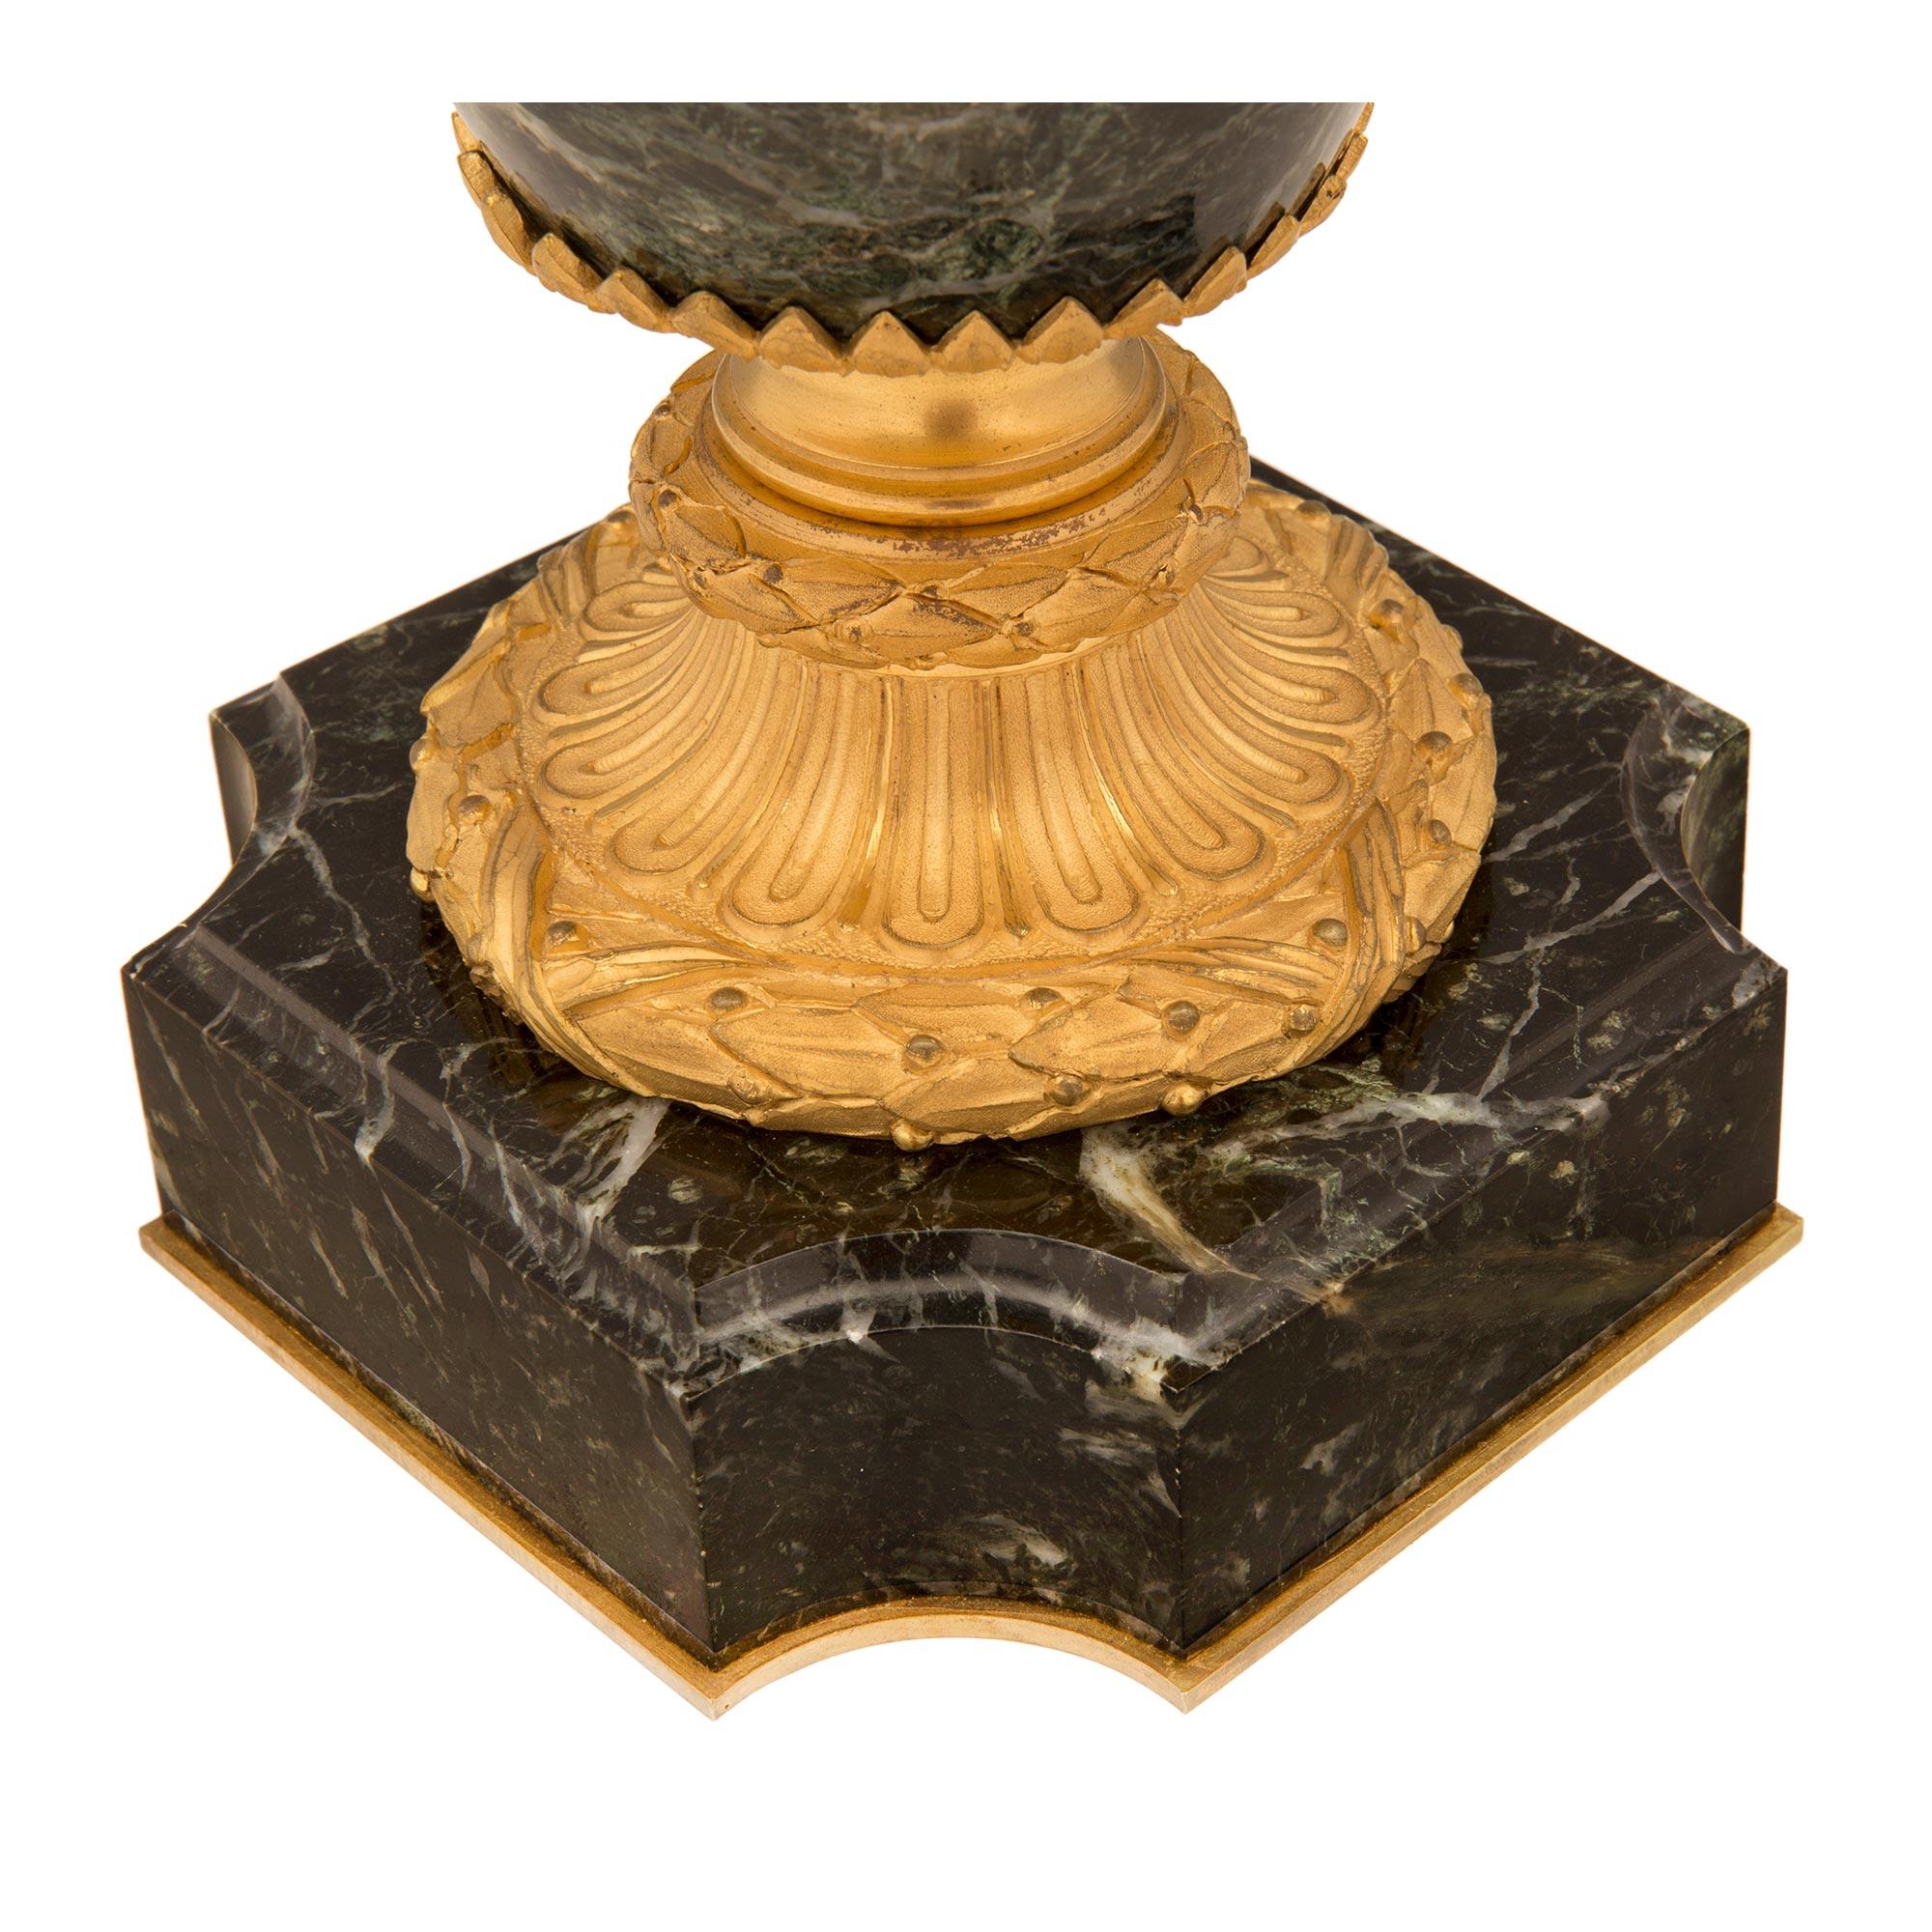 Pair of French 19th Century Vert de Patricia Marble and Ormolu Lidded Urns For Sale 7